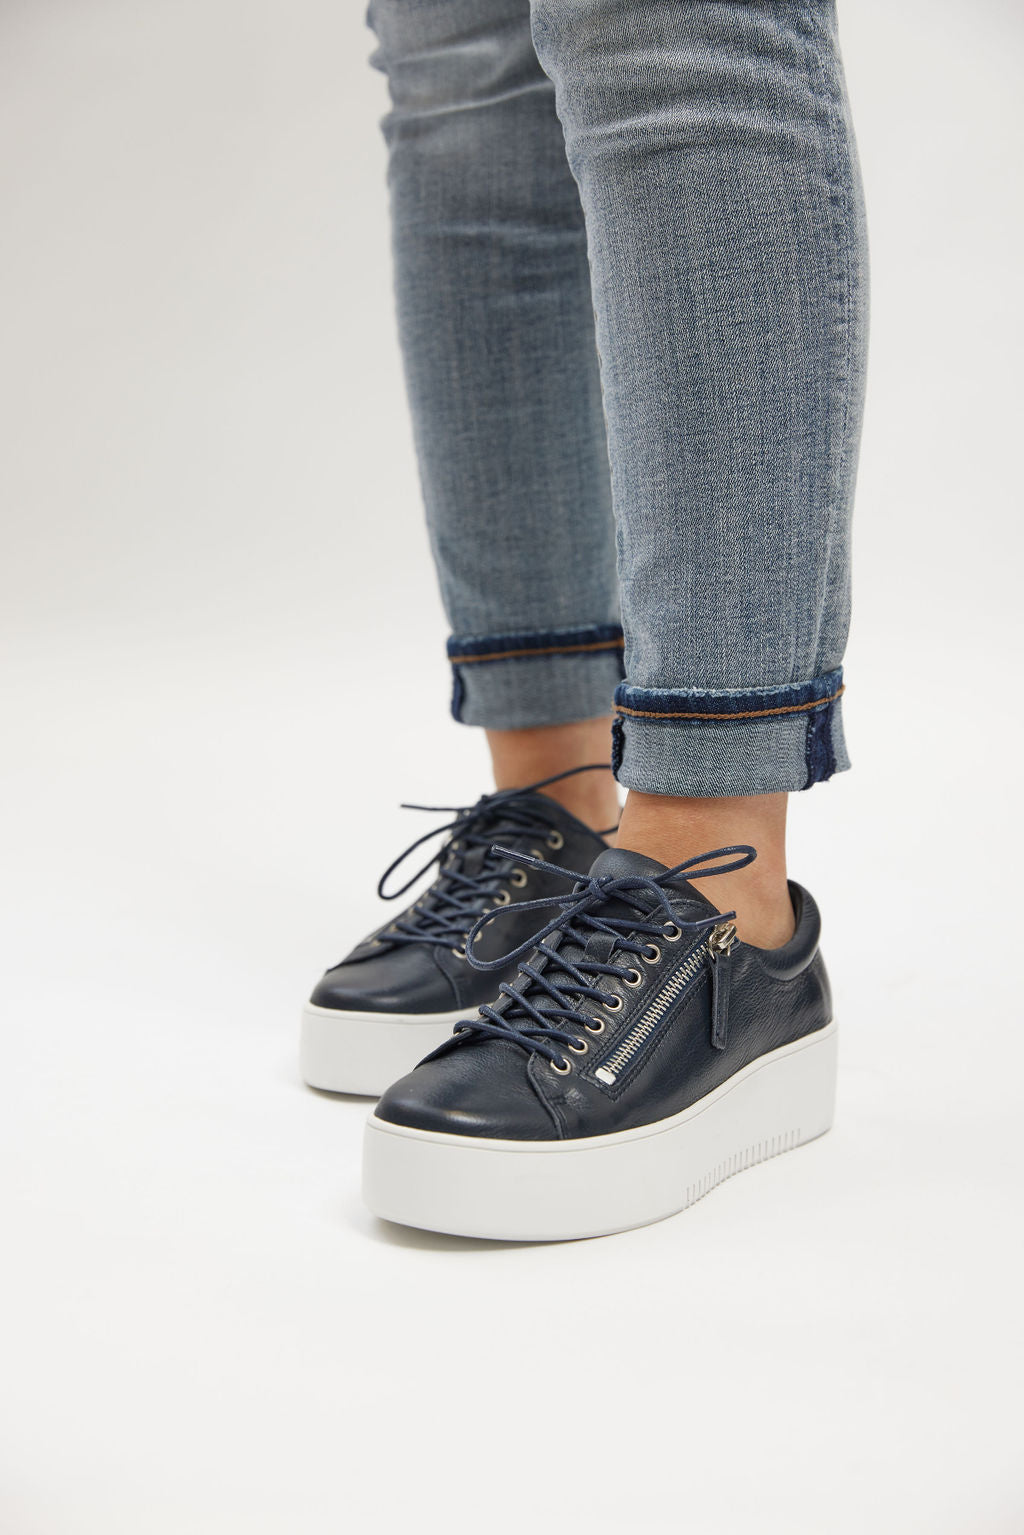 WOLFIE SNEAKERS - NAVY LEATHER